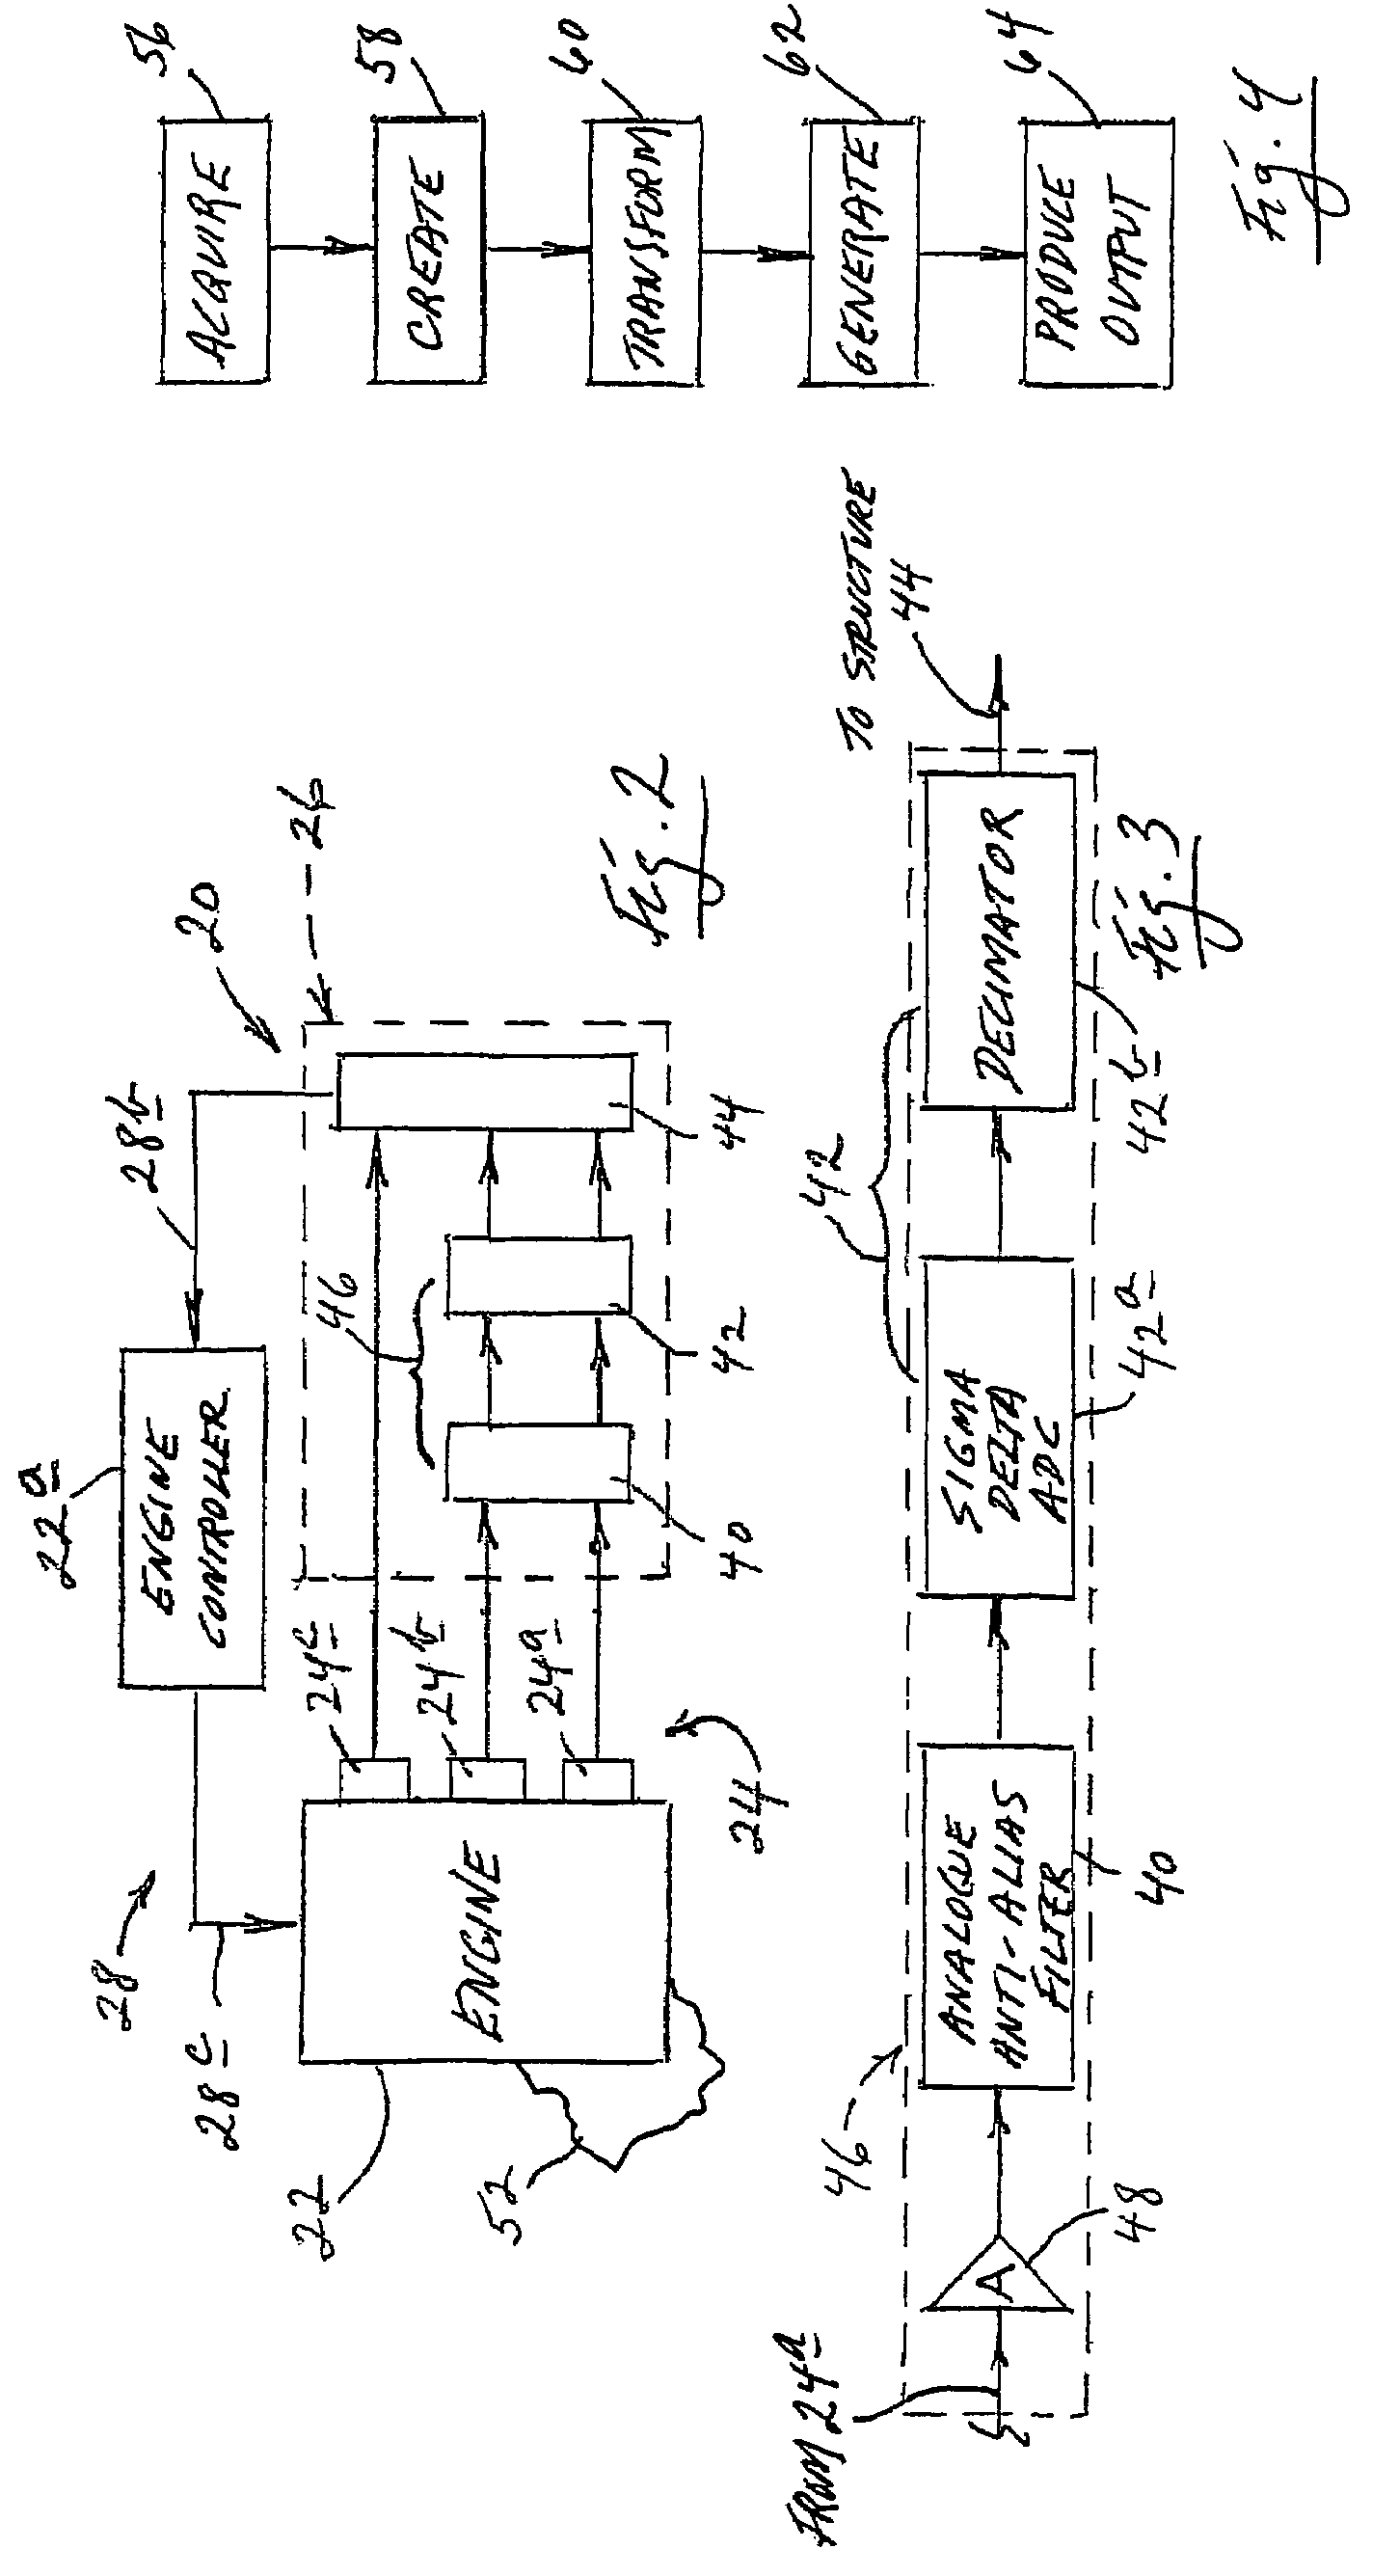 Dynamic noise-reduction baselining for real-time spectral analysis of internal combustion engine knock